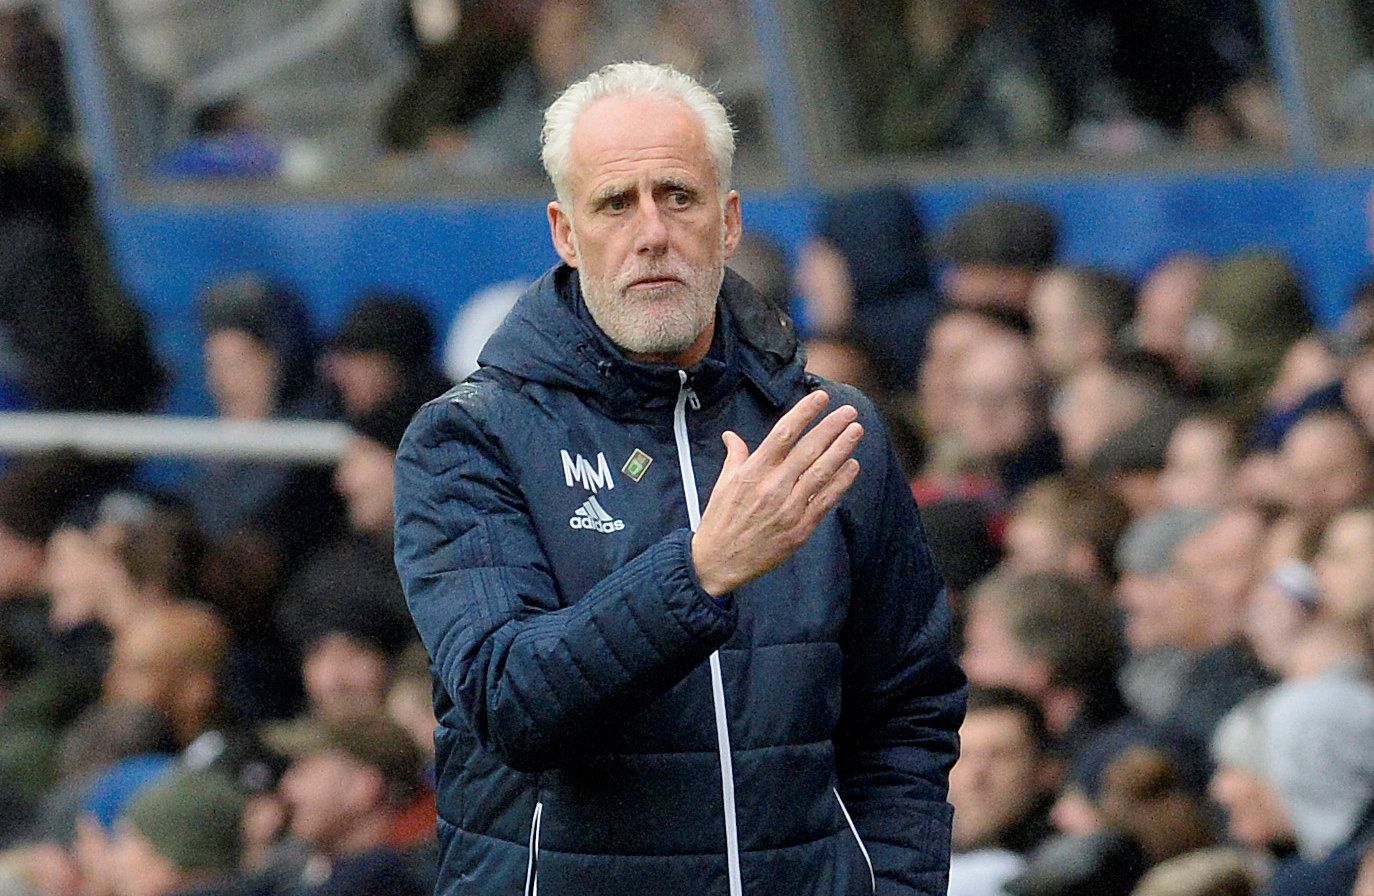 Soccer Football - Championship - Birmingham City vs Ipswich Town - St Andrew's, Birmingham, Britain - March 31, 2018   Ipswich manager Mick McCarthy    Action Images/Alan Walter    EDITORIAL USE ONLY. No use with unauthorized audio, video, data, fixture lists, club/league logos or "live" services. Online in-match use limited to 75 images, no video emulation. No use in betting, games or single club/league/player publications. Please contact your account representative for further details.